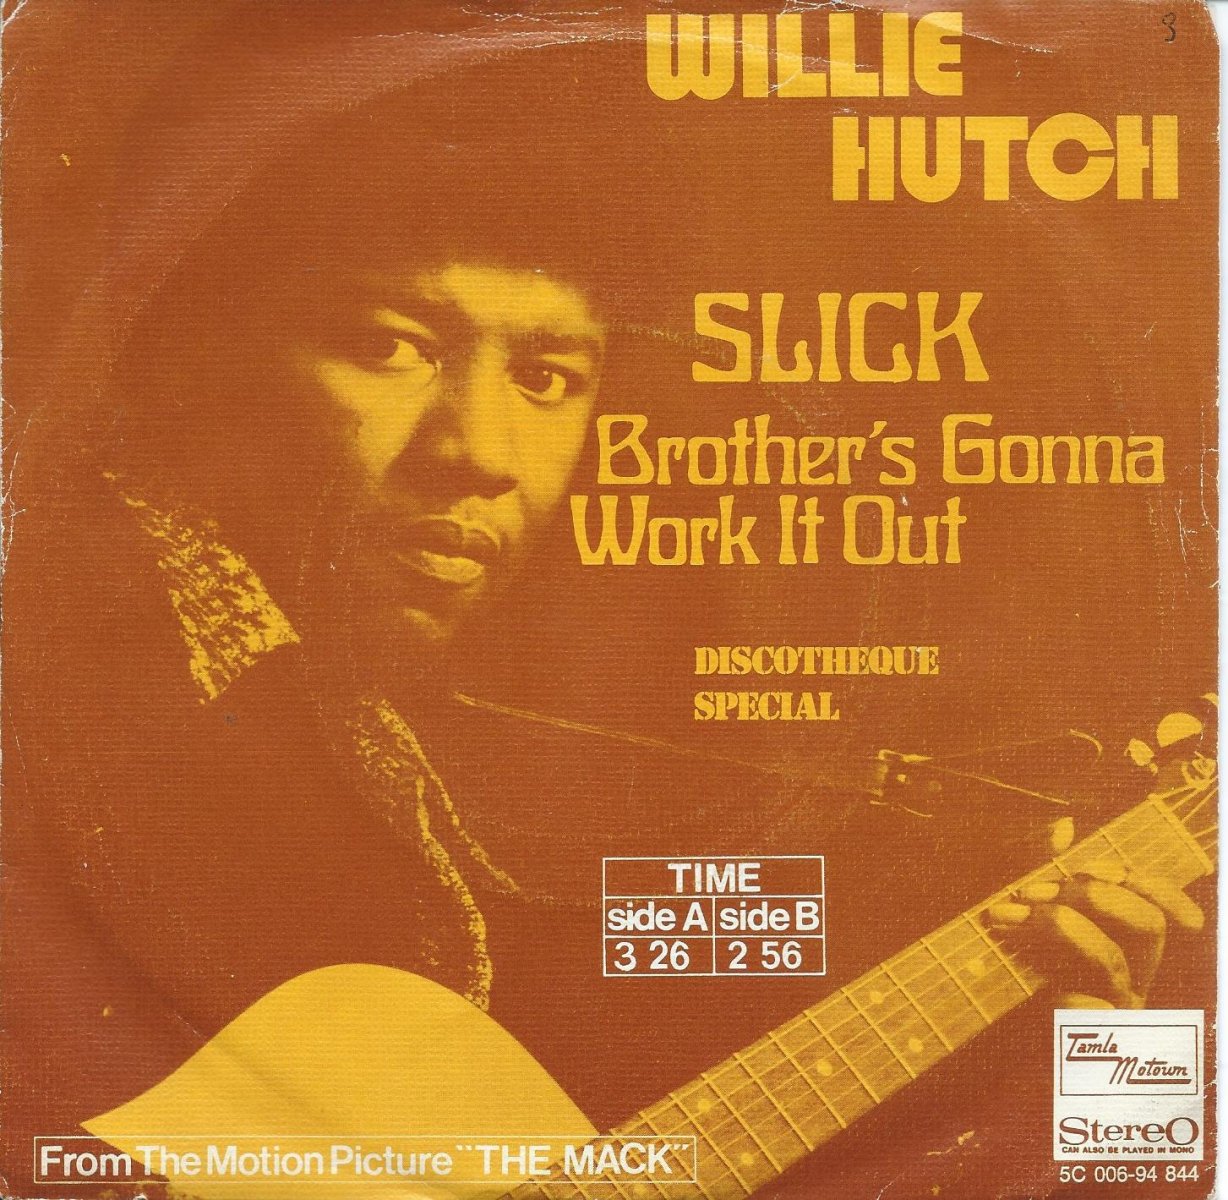 WILLIE HUTCH / BROTHER'S GONNA WORK IT OUT / SLICK (7